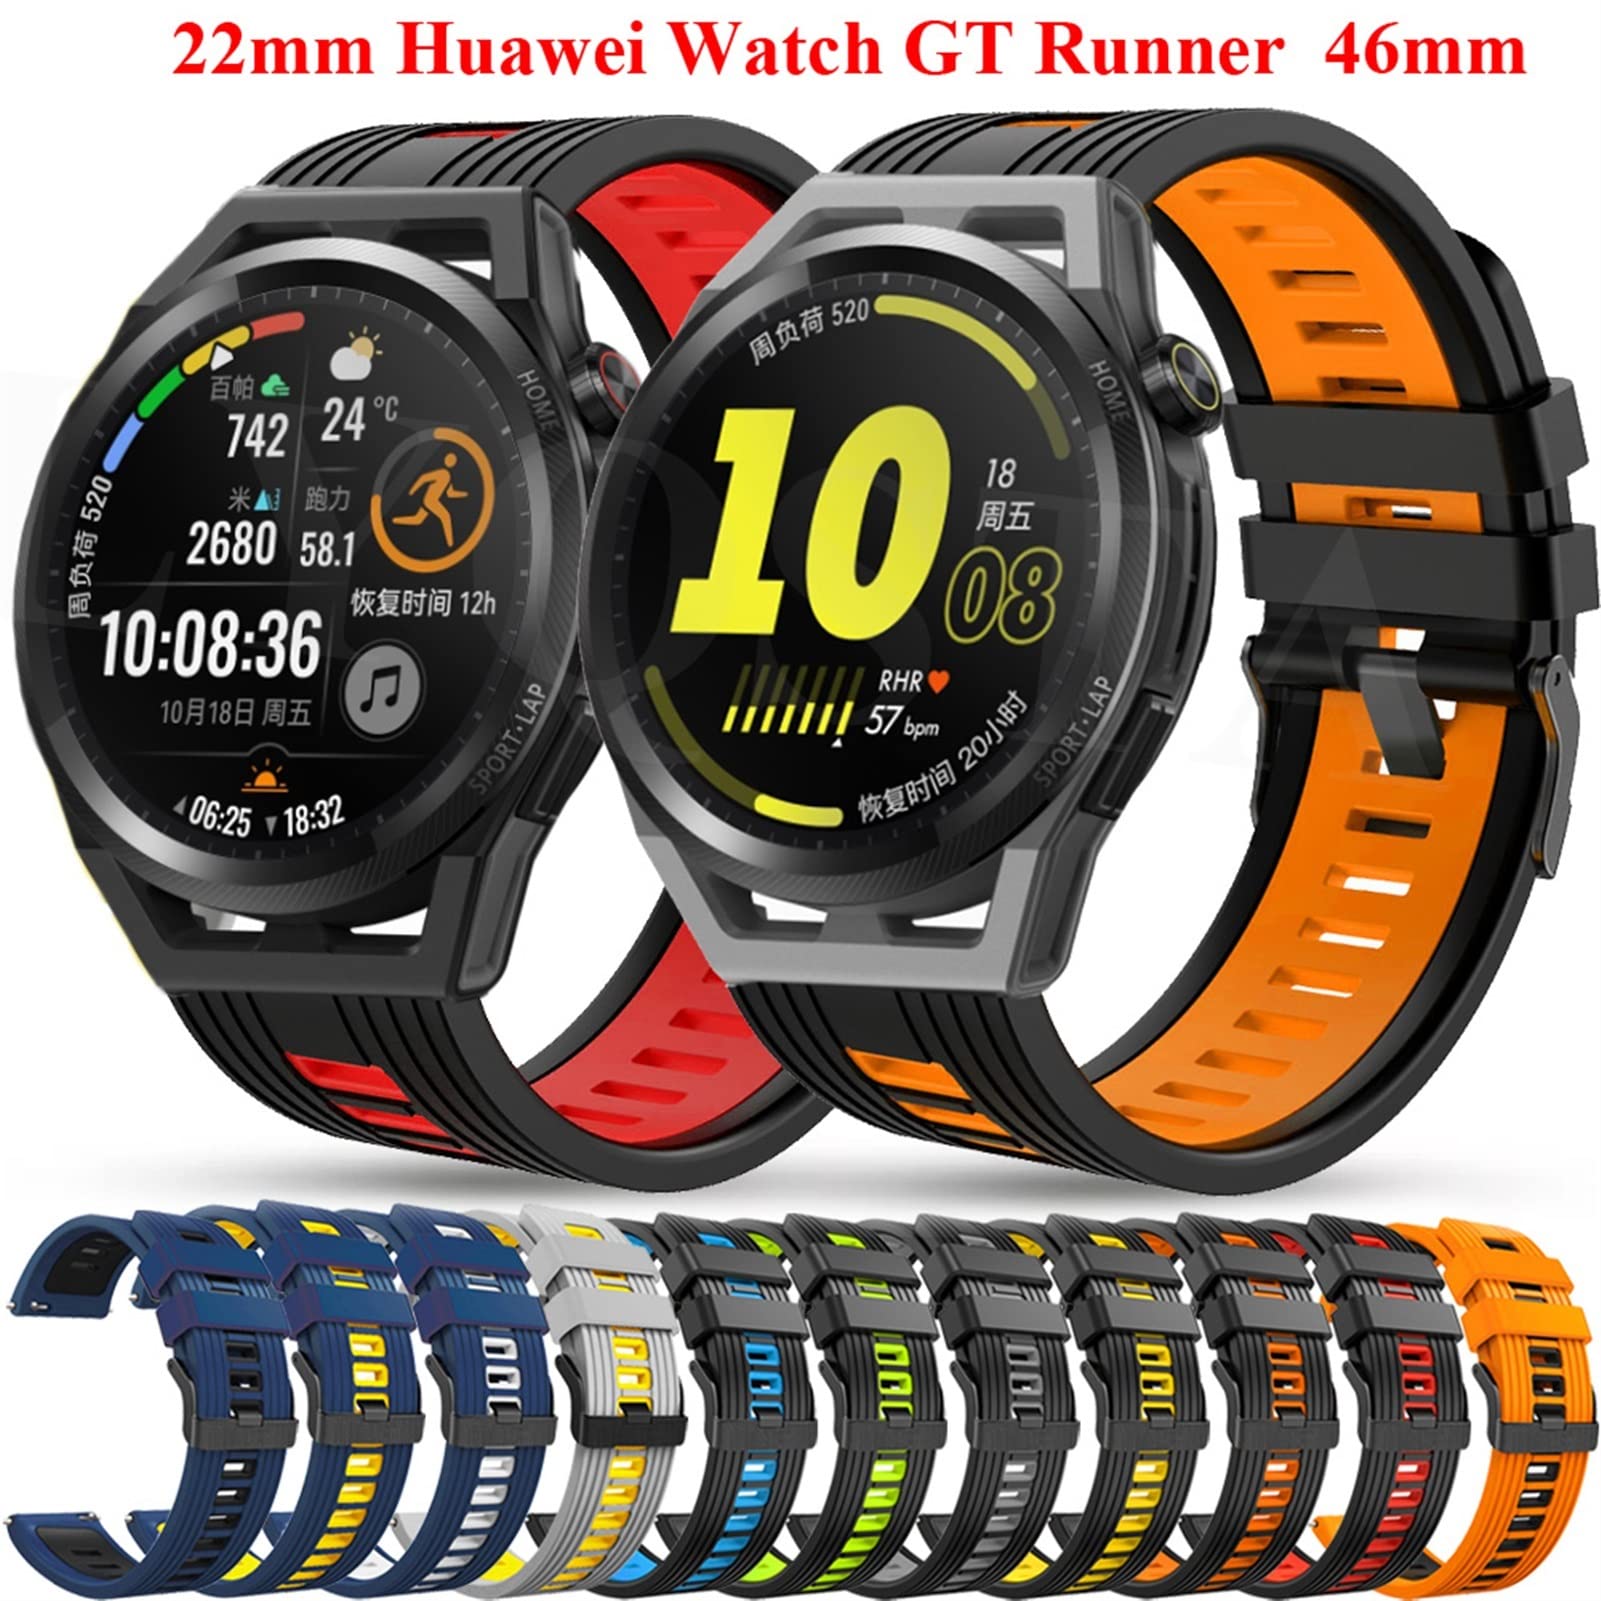 COOVS Silicone Band Strap for Huawei Watch GT3 GT Runner 46mm Original Watchband 22mm Universal Replacement Bracelet (Color : Style A, Size : 22mm Universal)